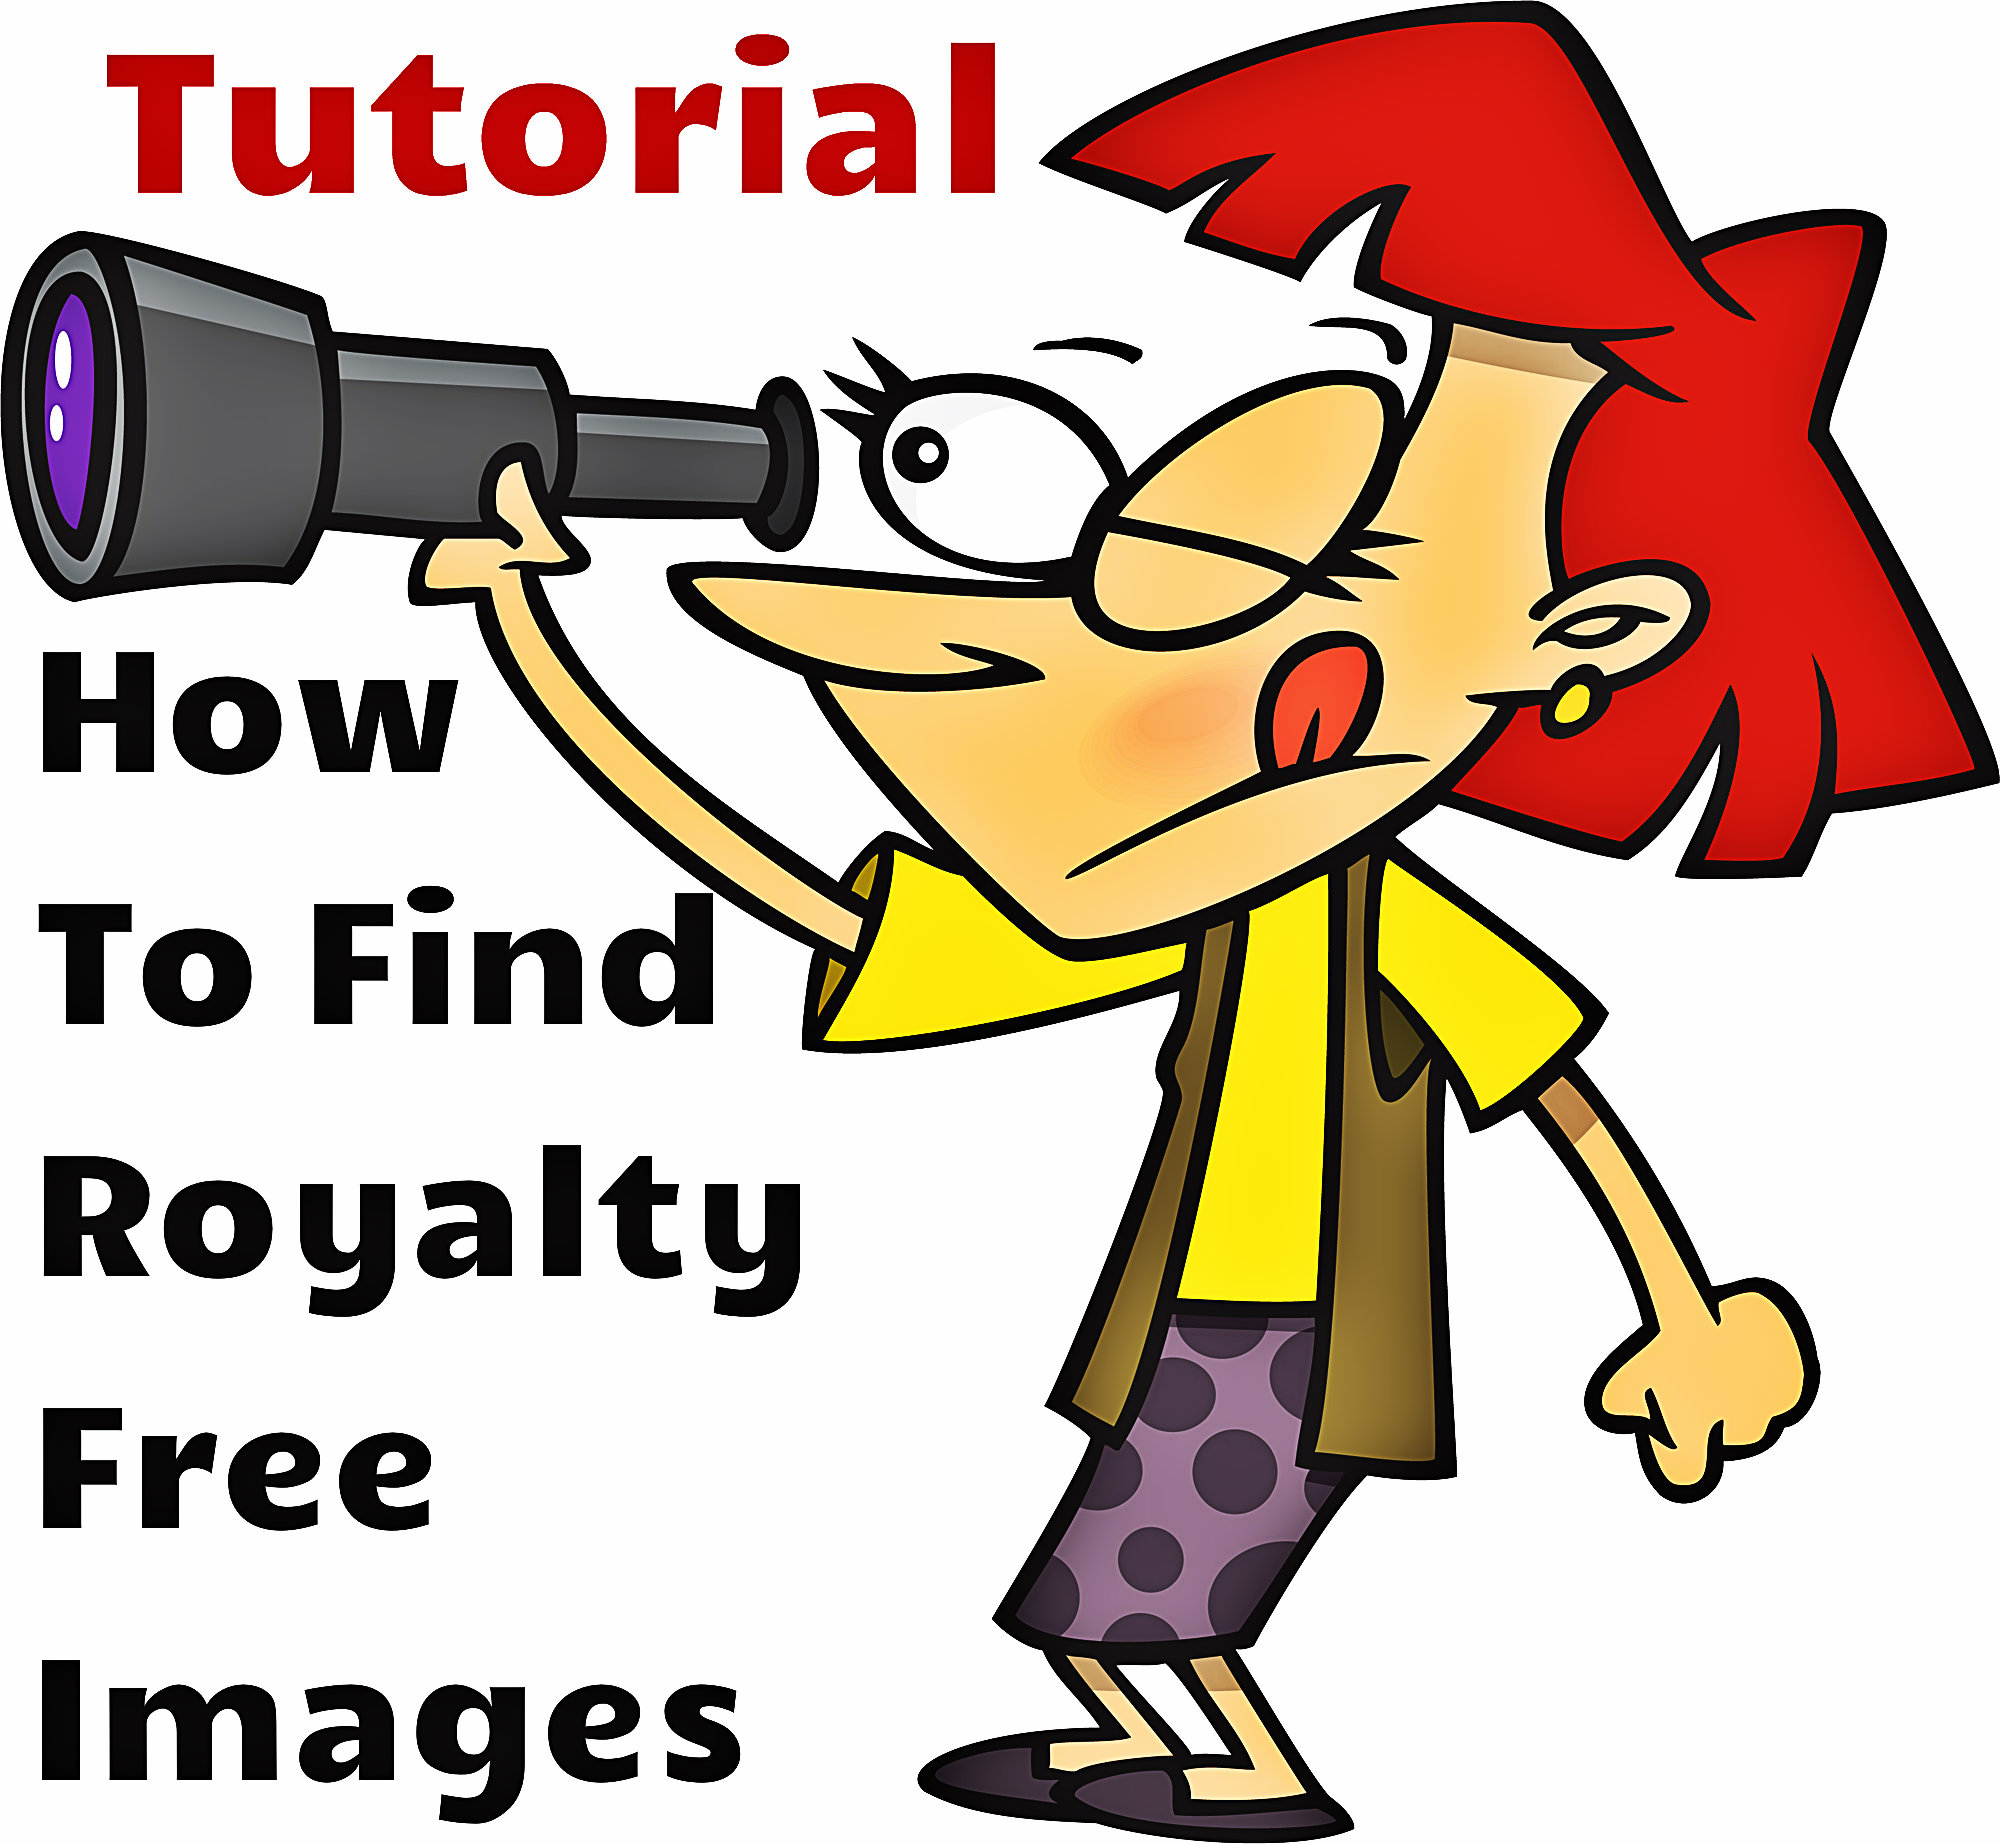 Royalty Free Images | Free Clipart Sites | Readyteacher.com